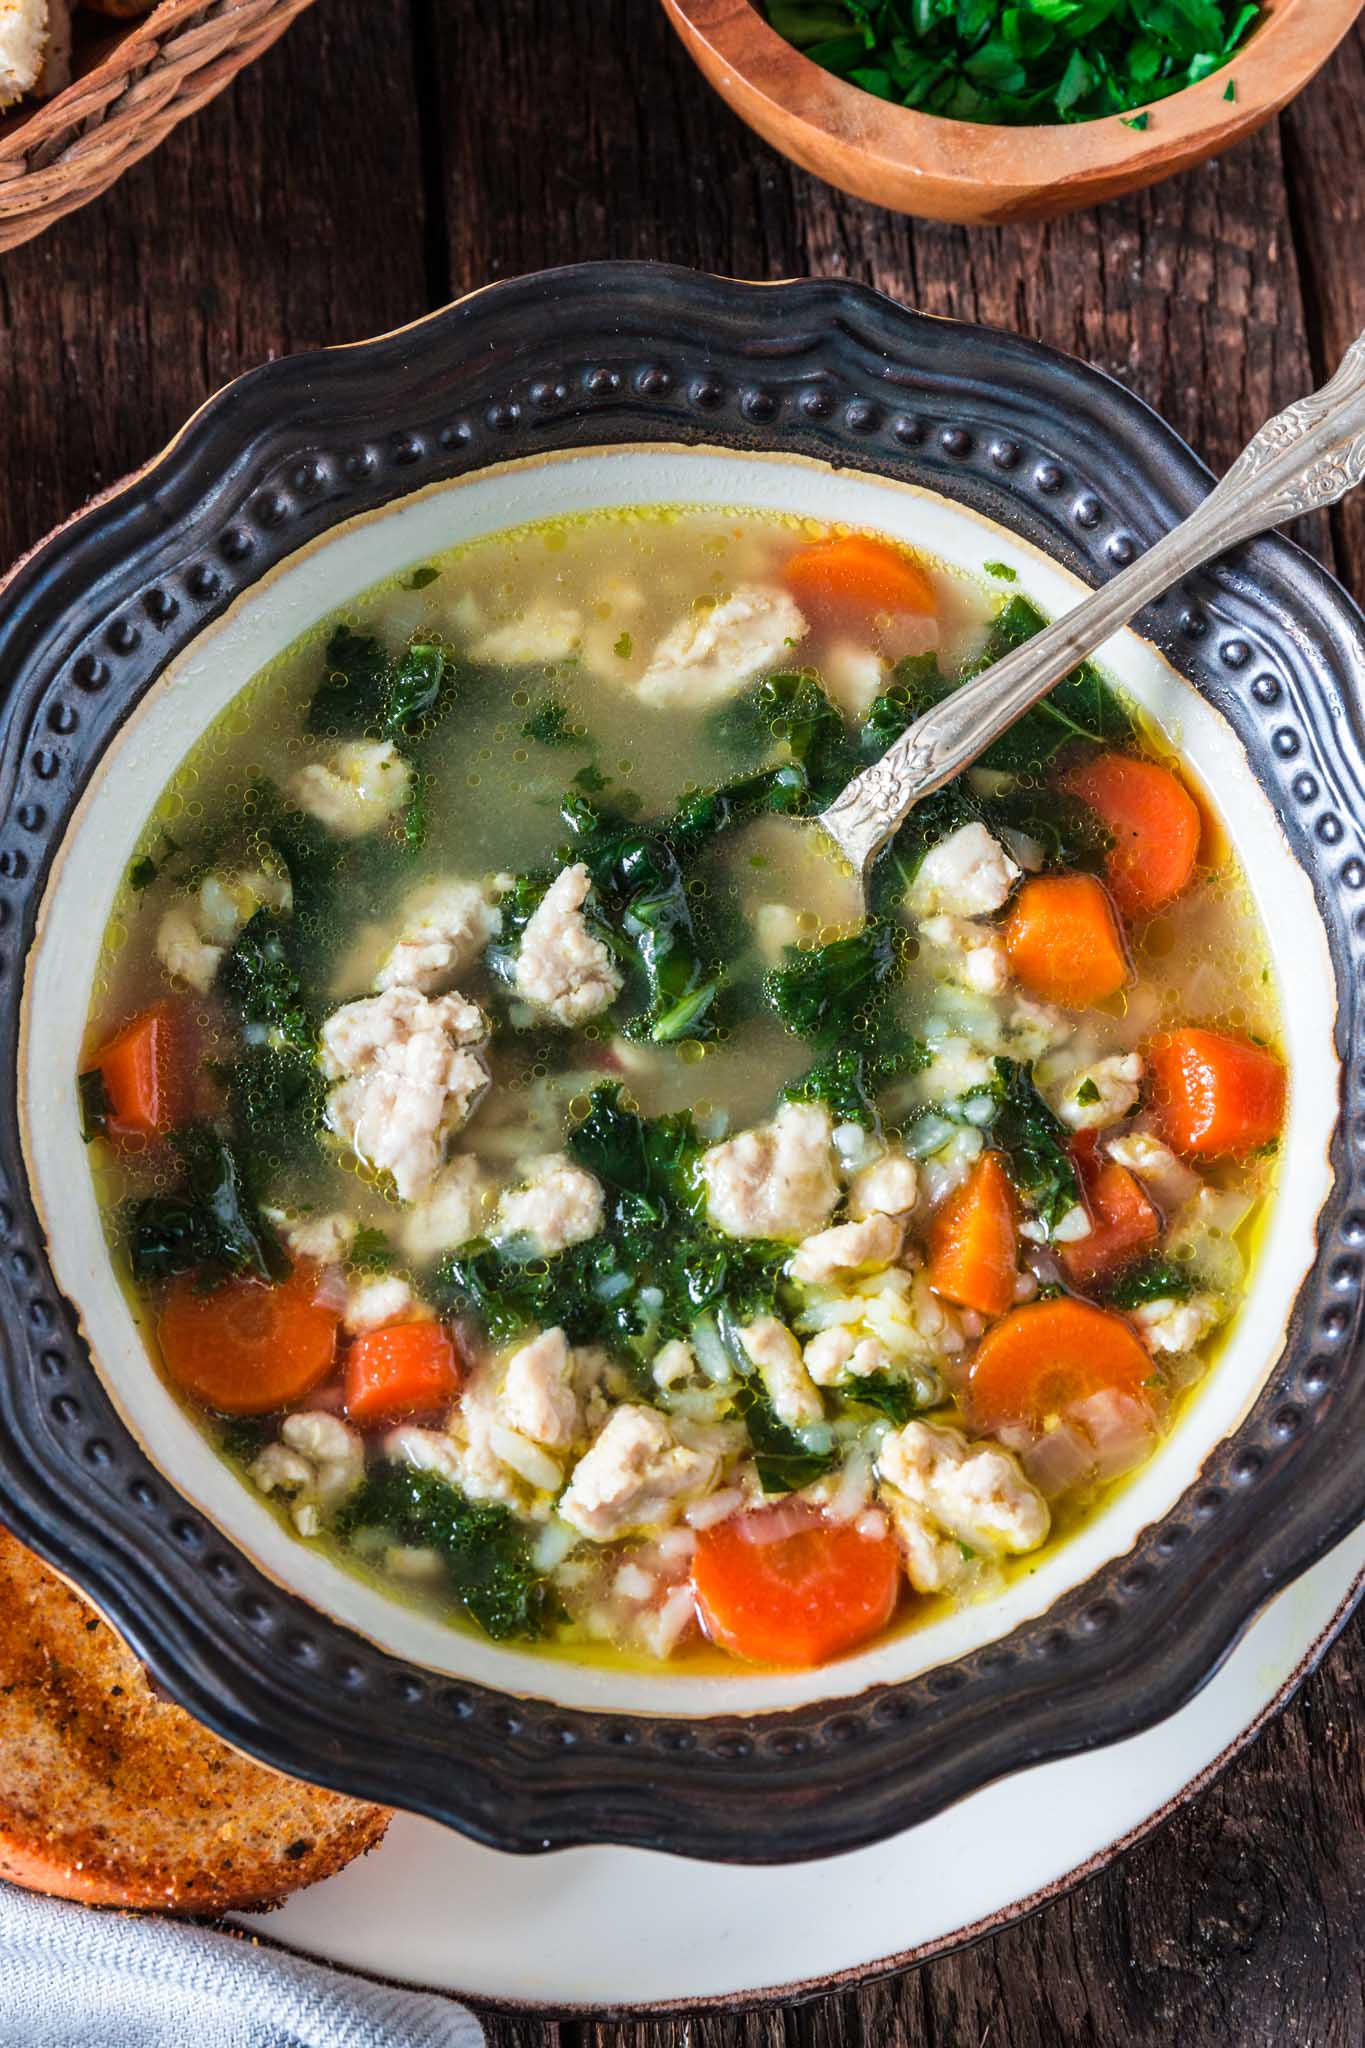 Turkey, Kale and Rice Soup | www.oliviascuisine.com | Nothing warms you up like a cozy bowl of Turkey, Kale and Rice Soup! Loaded with nutrients and low in fat, so you can stay true to your "eating healthy" New Year resolutions. (Sponsored by @JennieO.)